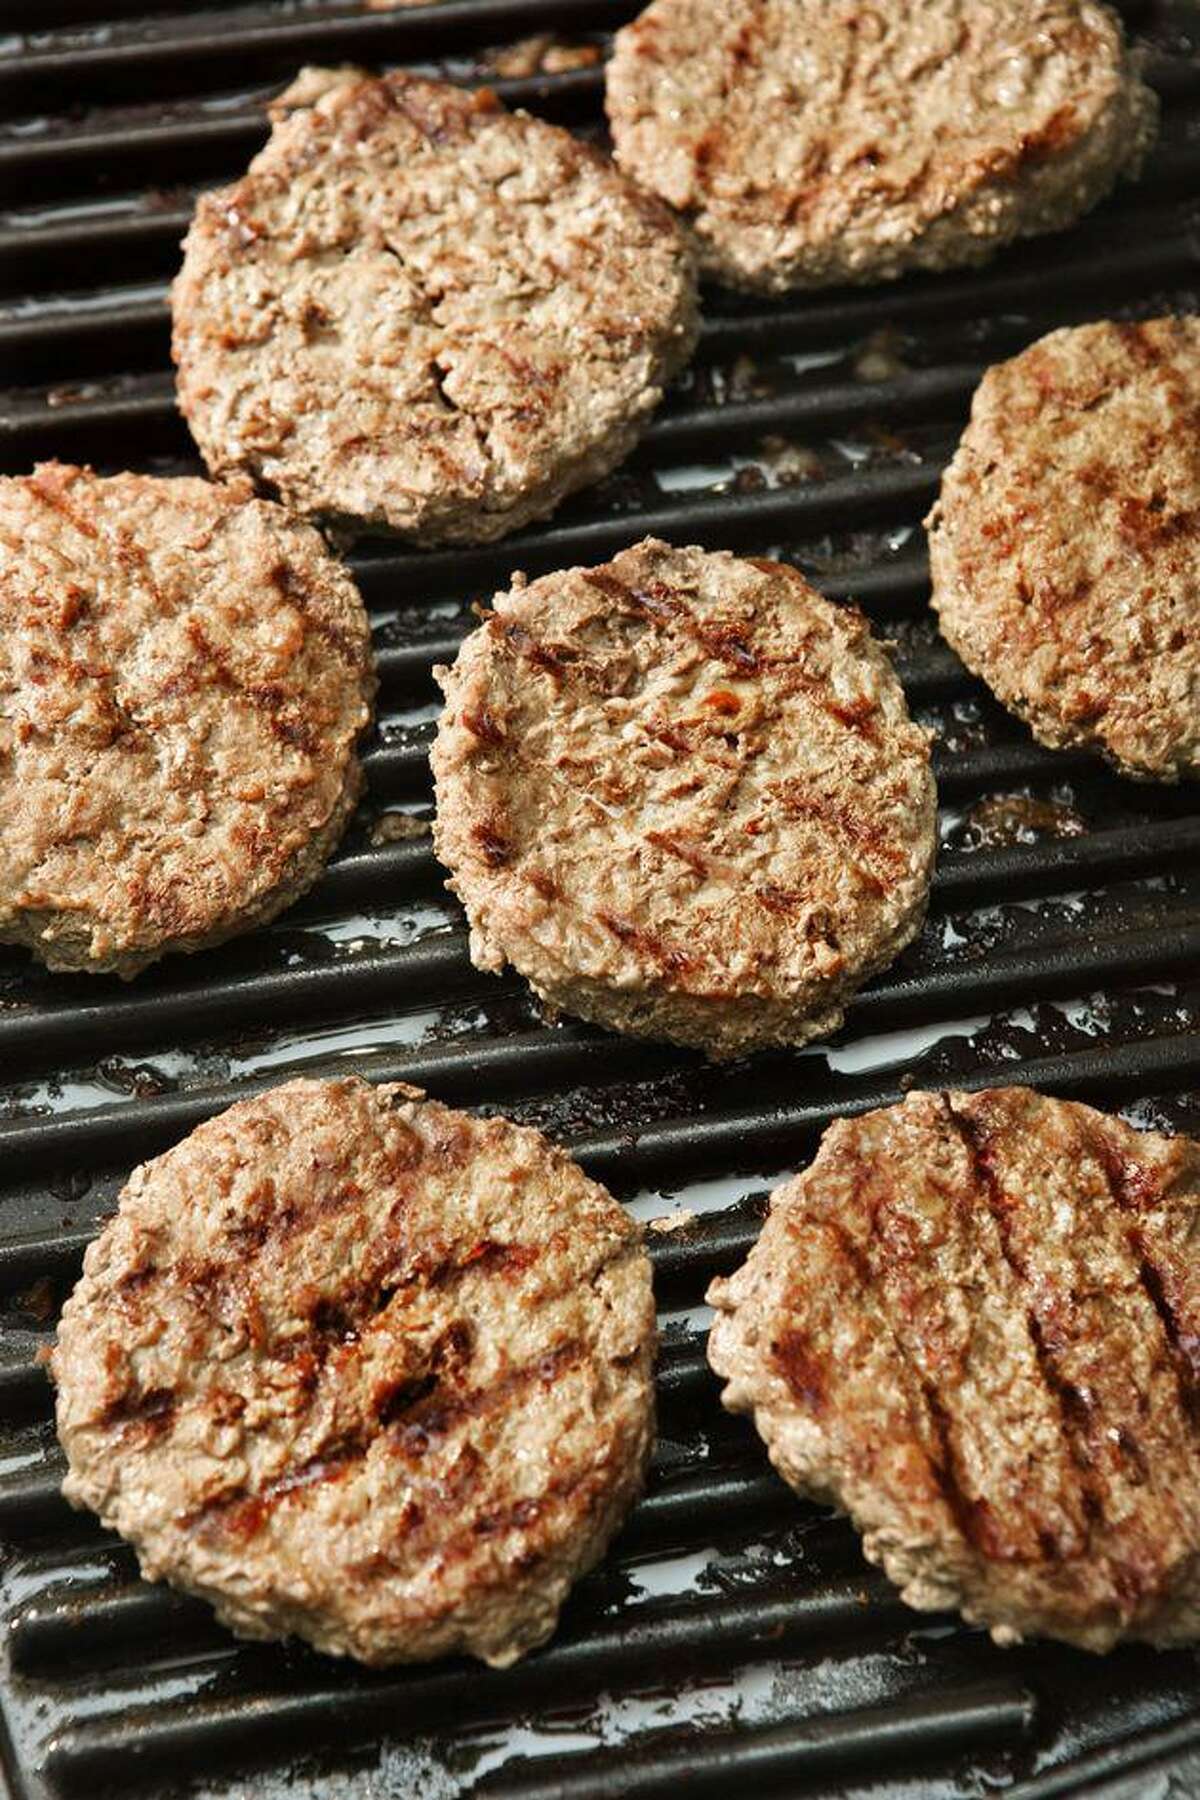 Beef is expected to see increased consumer demand as prices in grocery stores drop, making the meat more competitive. Ground beef in grocery stores has dropped about 9 percent from a year ago, the most recent data from the U.S. Bureau of Labor Statistics show.